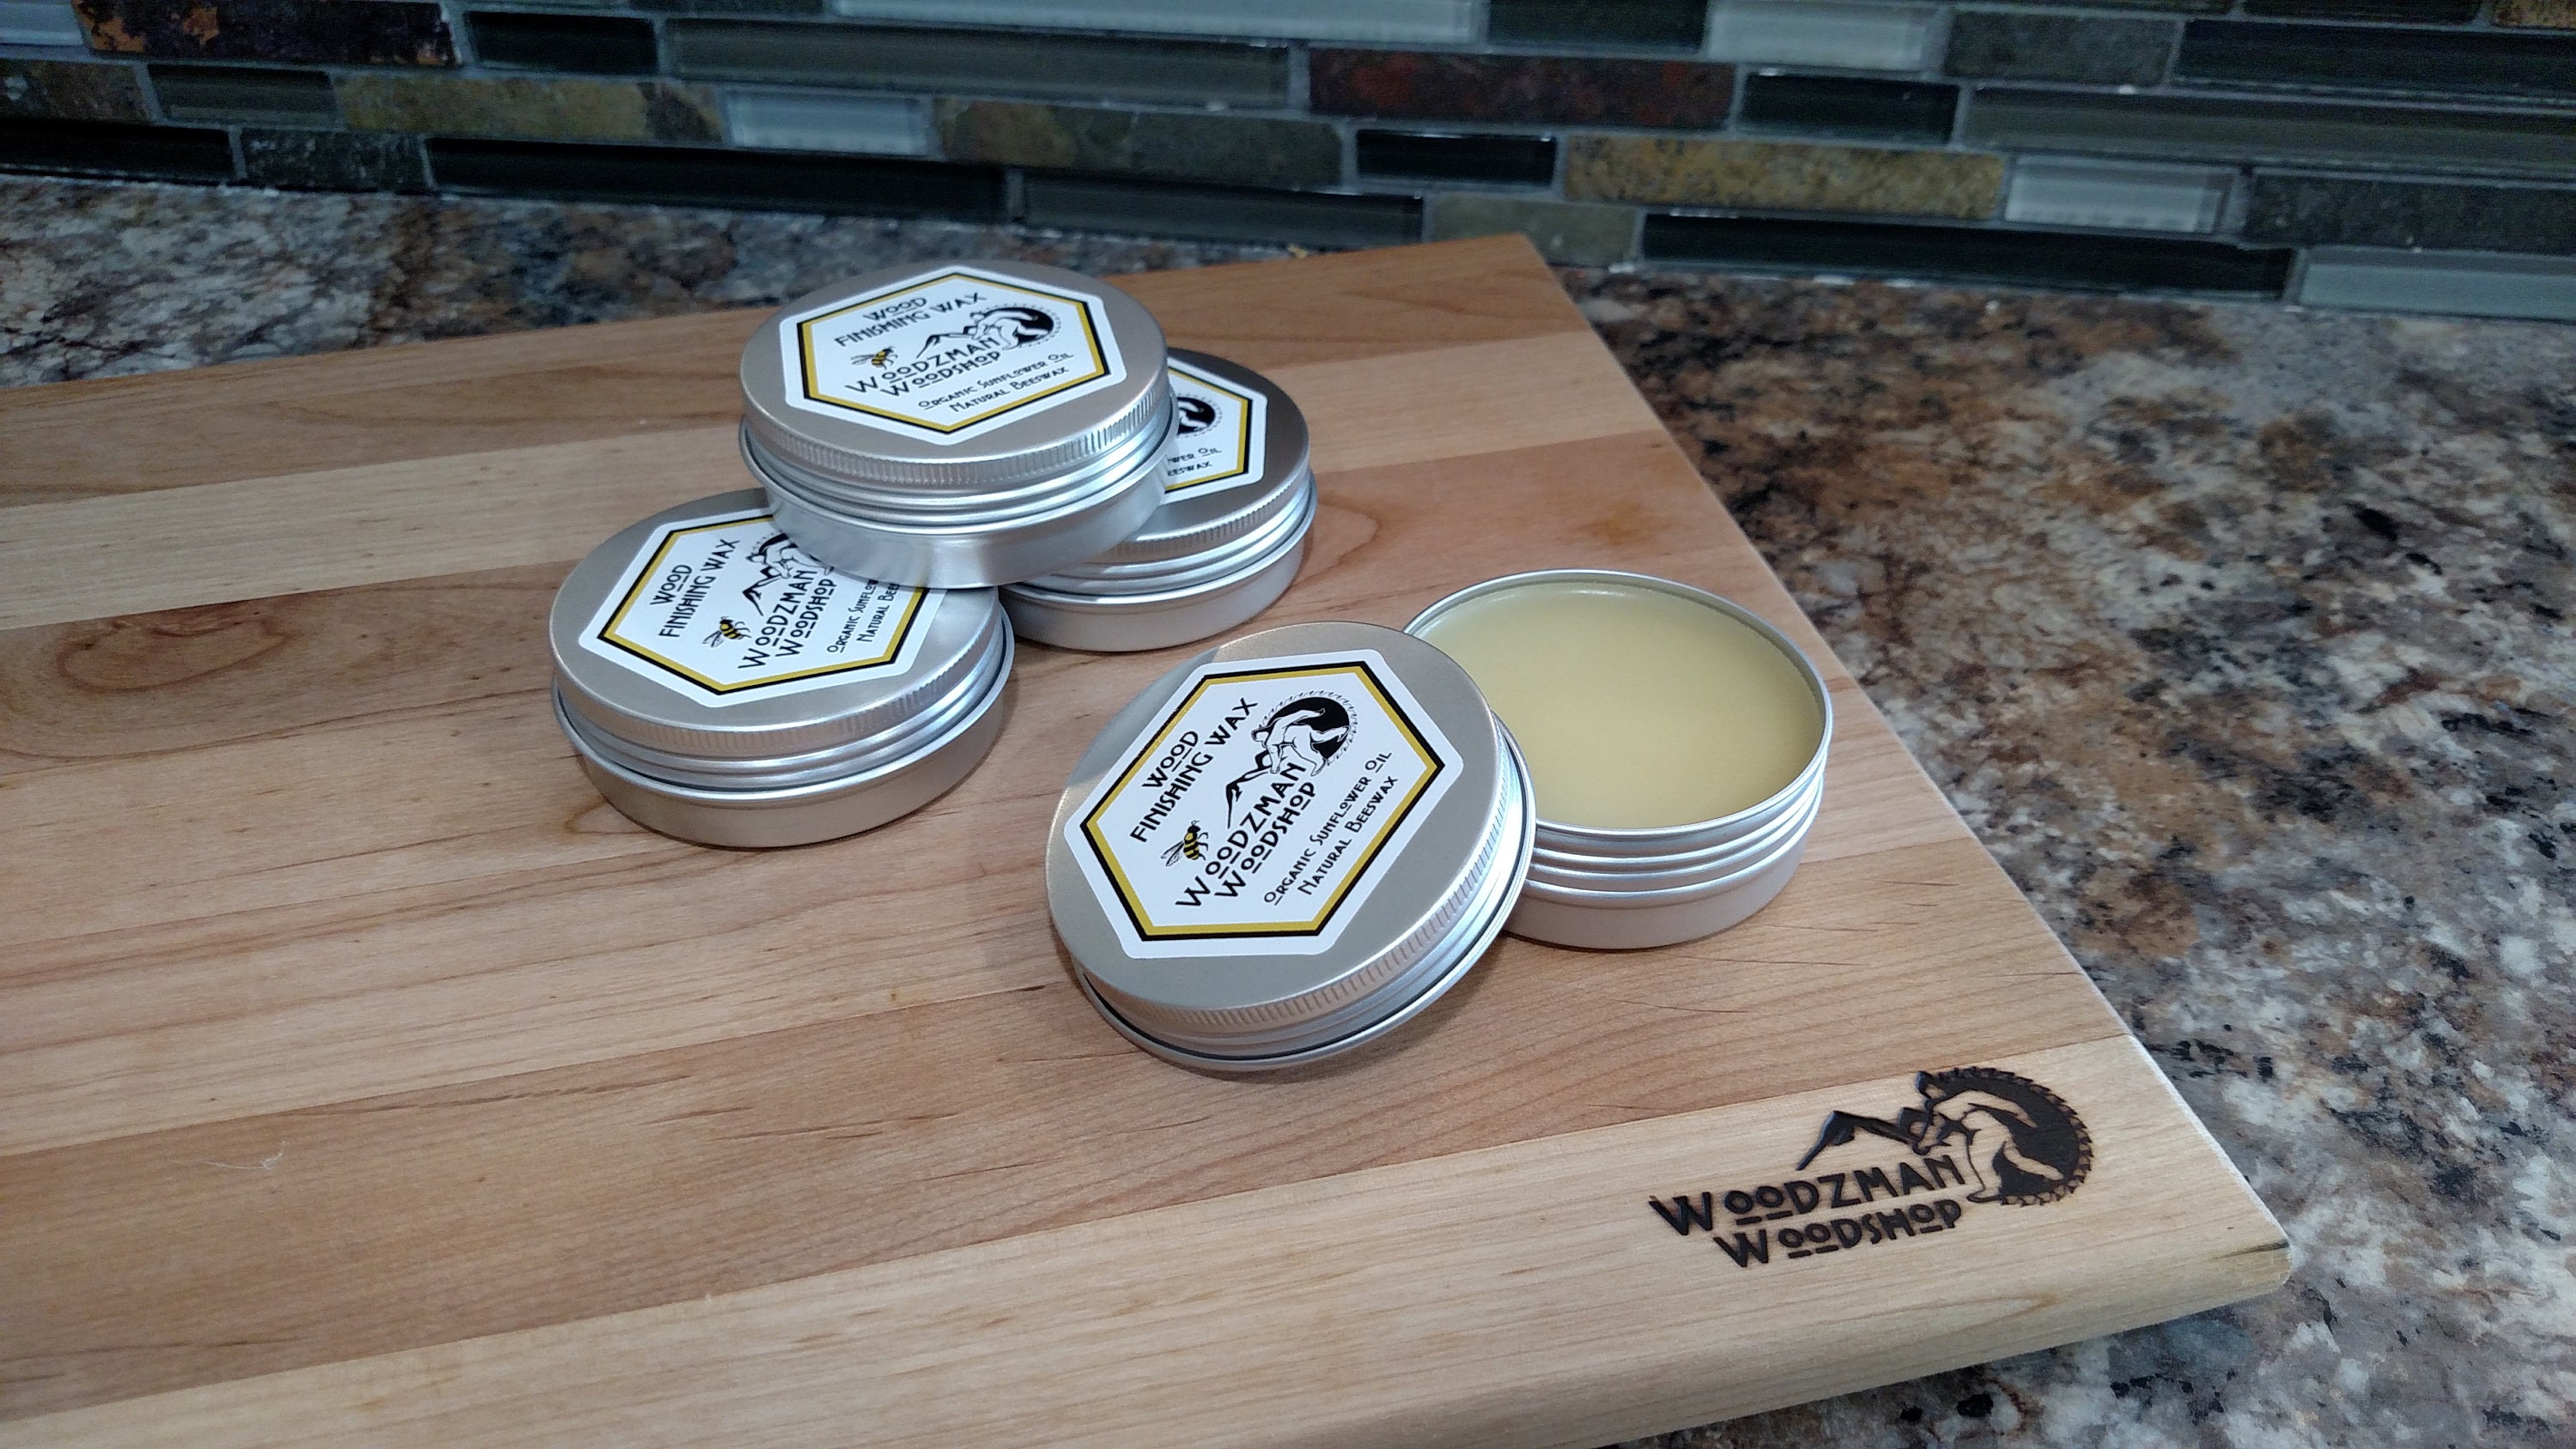 Beeswax/Mineral oil finish - Canadian Woodworking and Home Improvement Forum